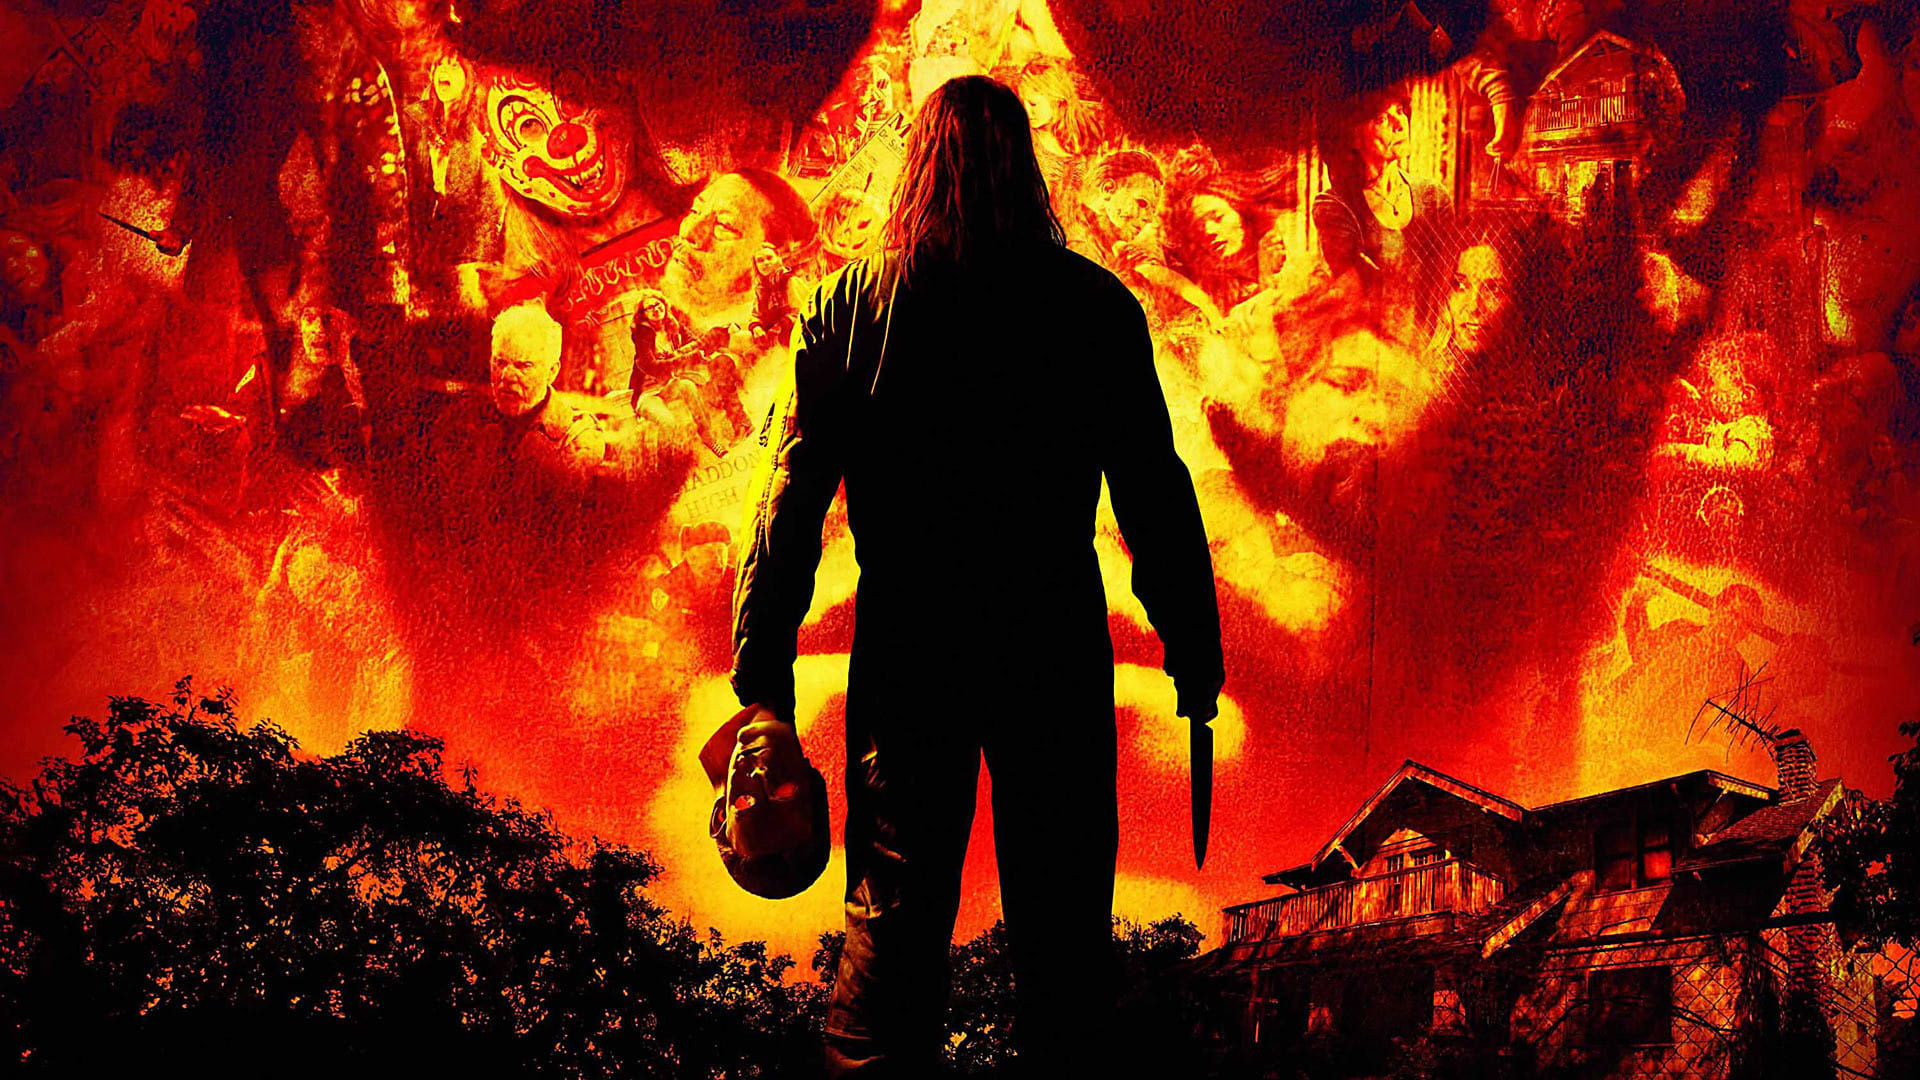 Rob Zombie Wallpapers